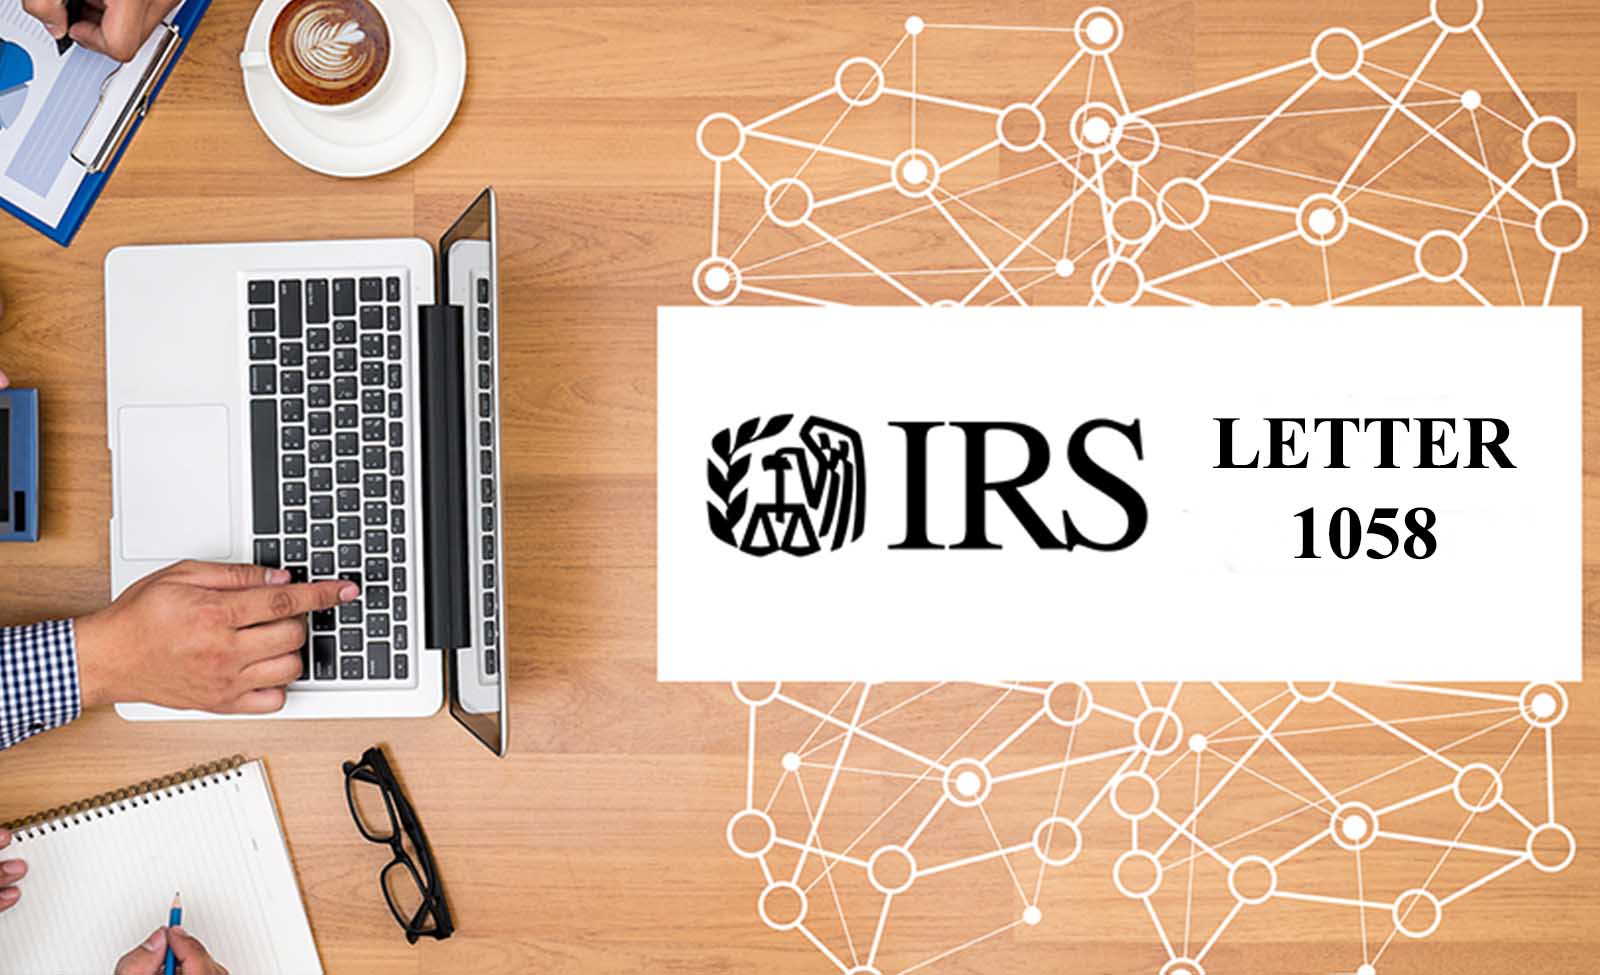 How to respond to IRS Tax Letter 1058